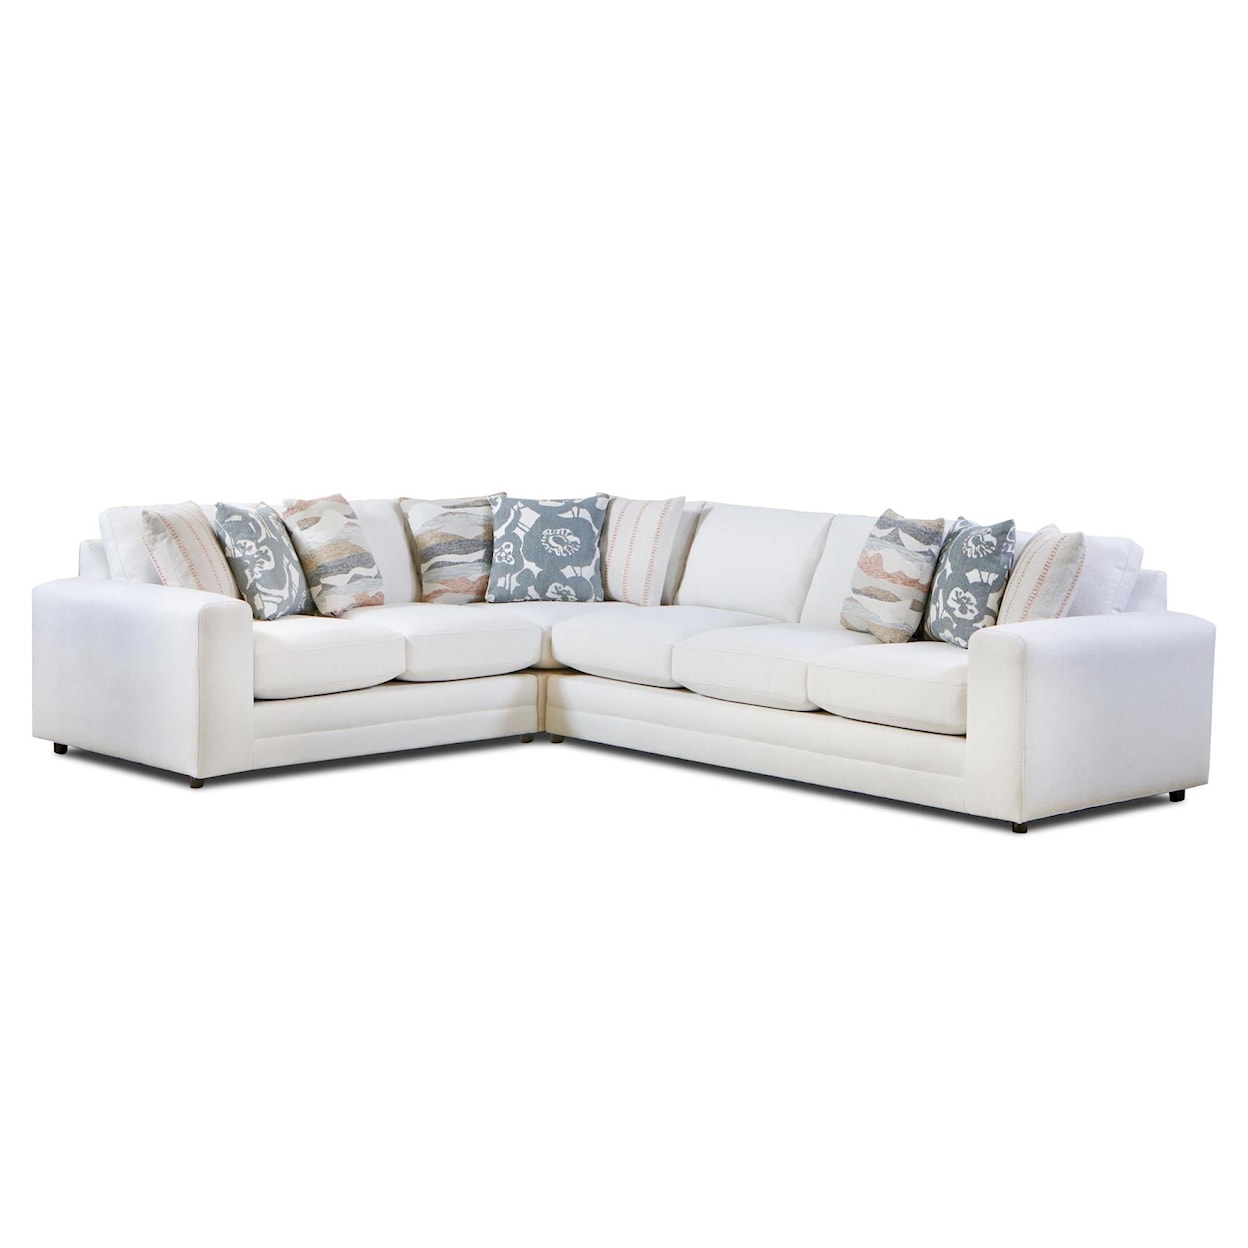 Fusion Furniture 7000 MISSIONARY SALT Sectional